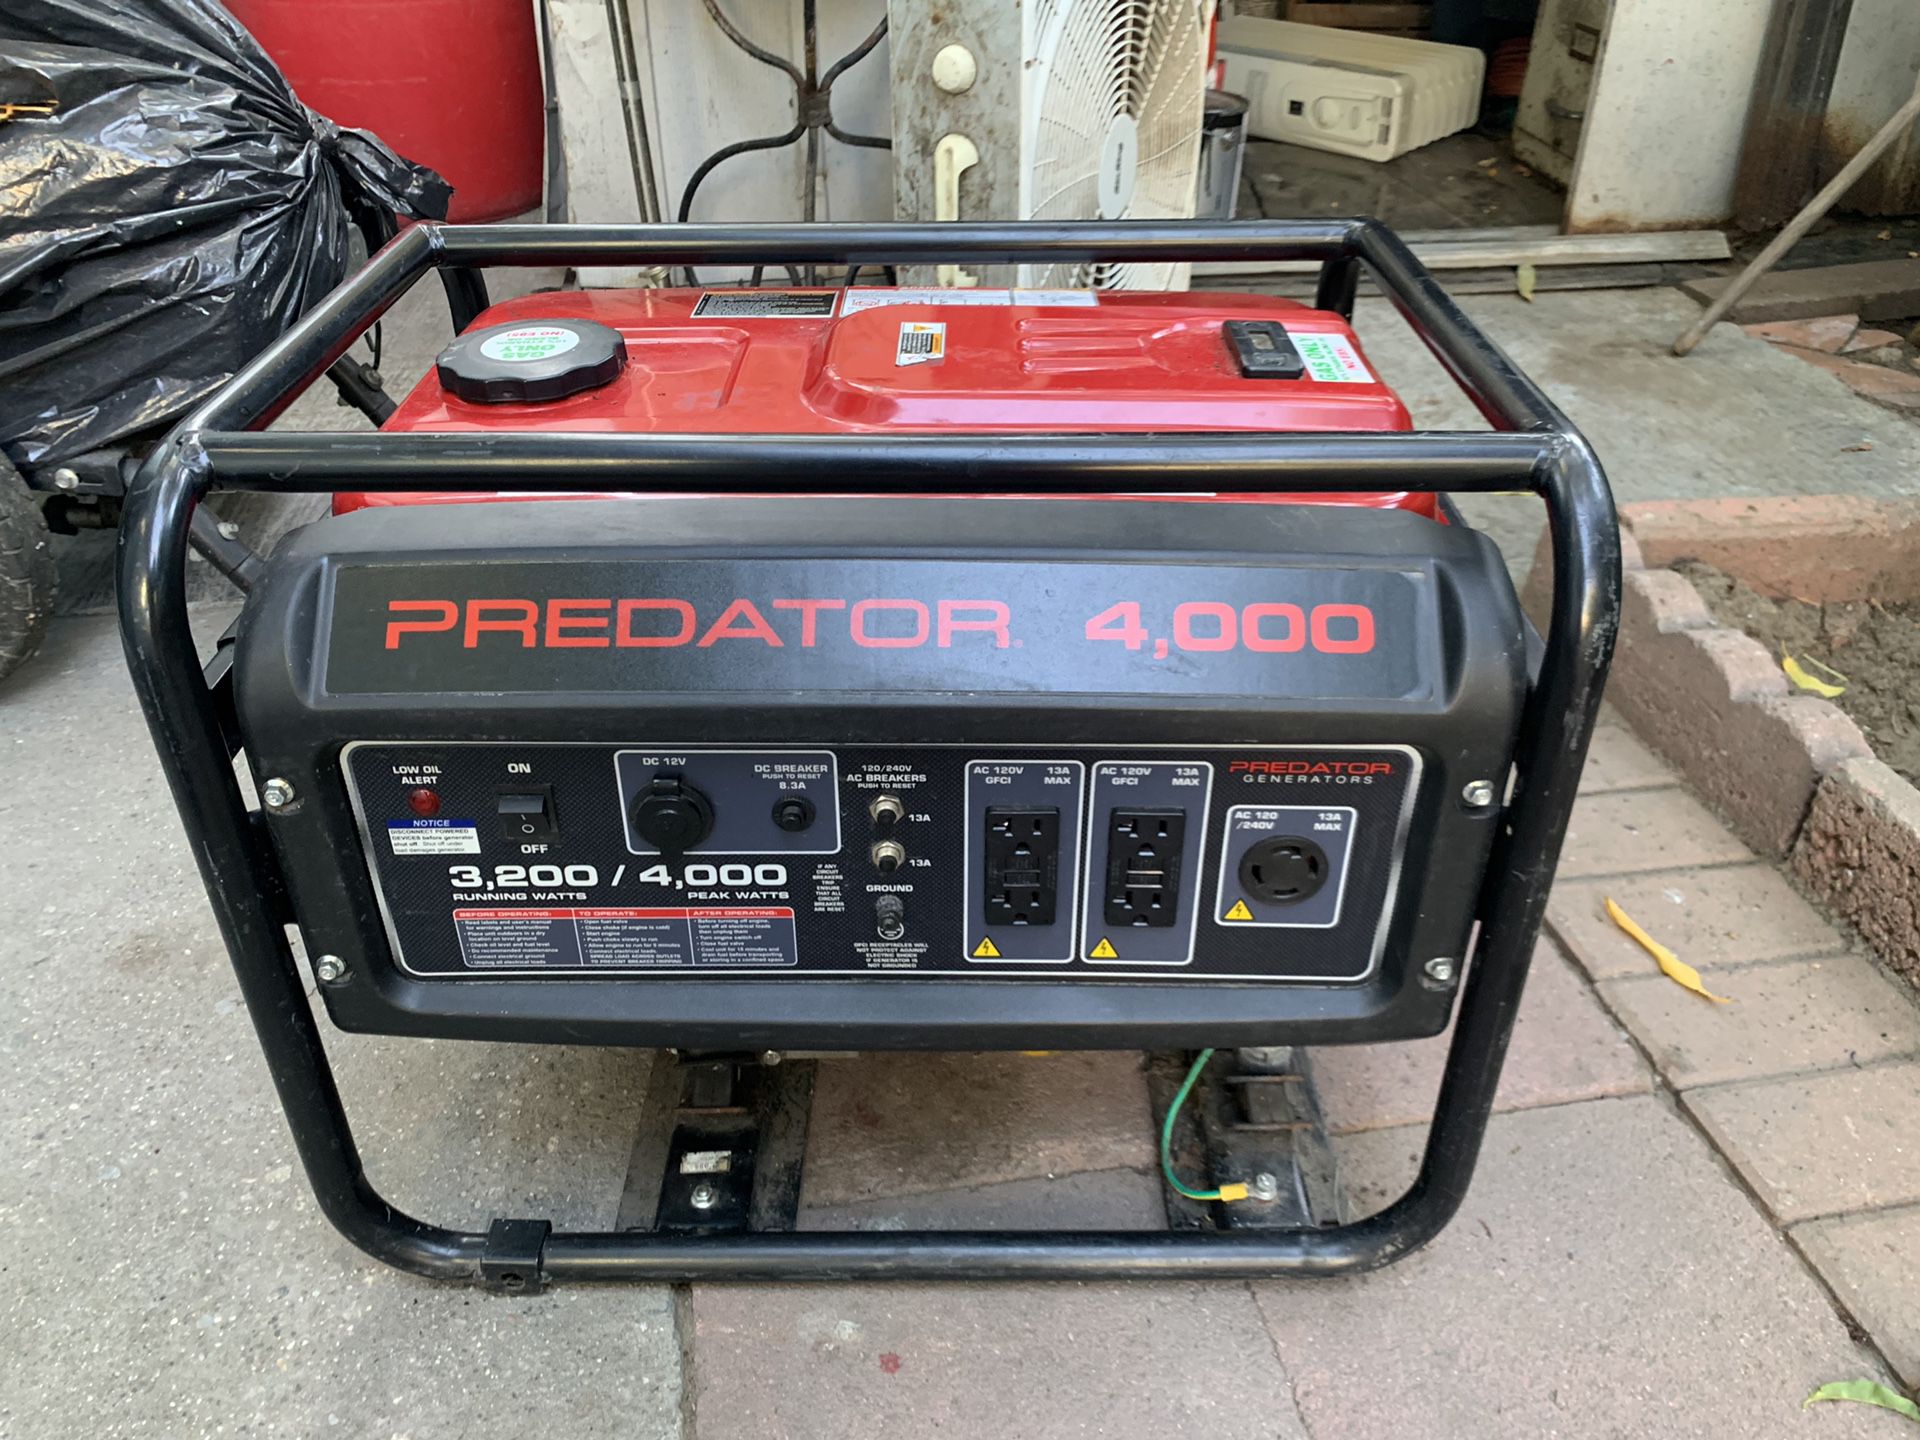 Power generator for sale $250